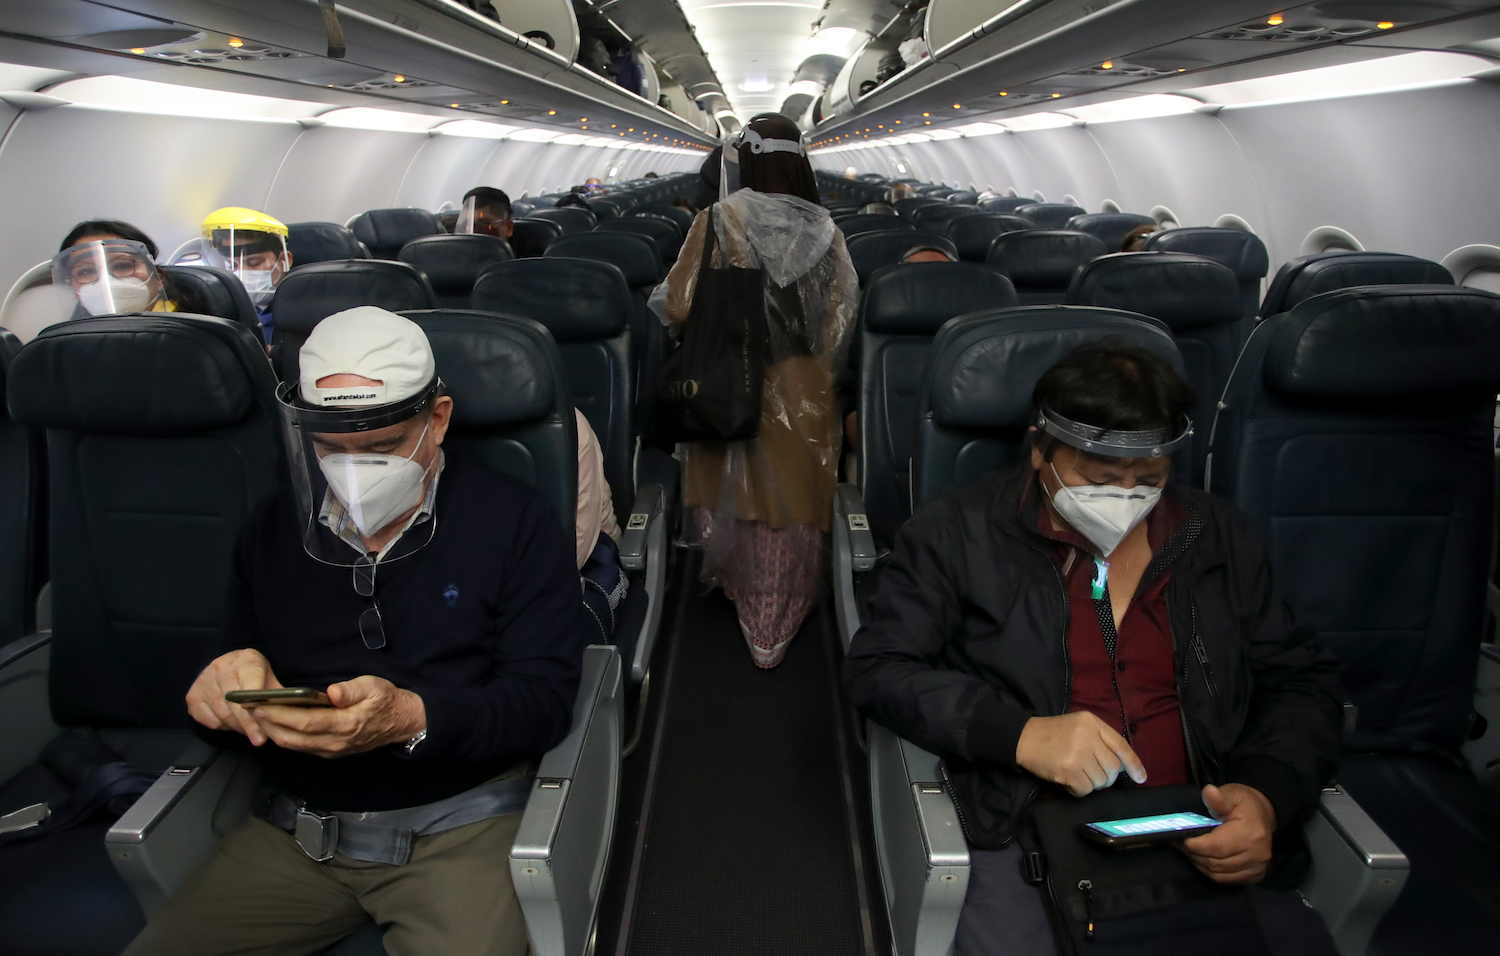 Airplane passengers wearing masks for holiday travel | Raul Sifuentes/Getty Images